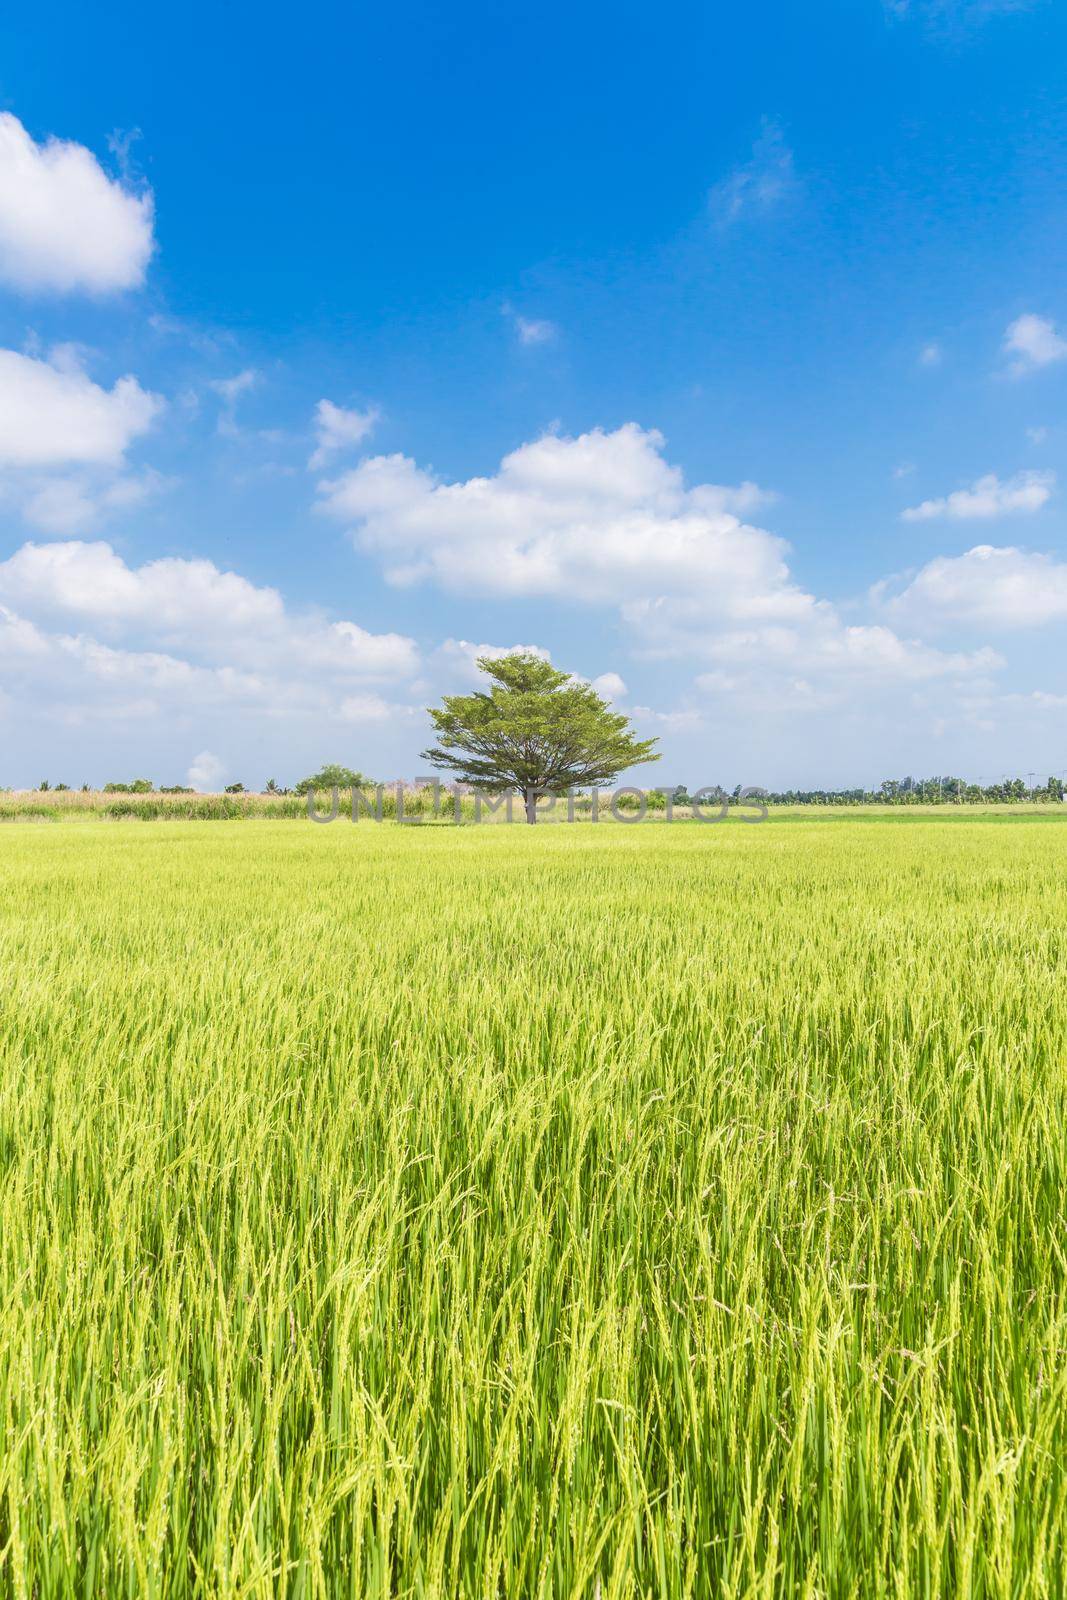 The Rice field and blue sky clouds background, Thailand.